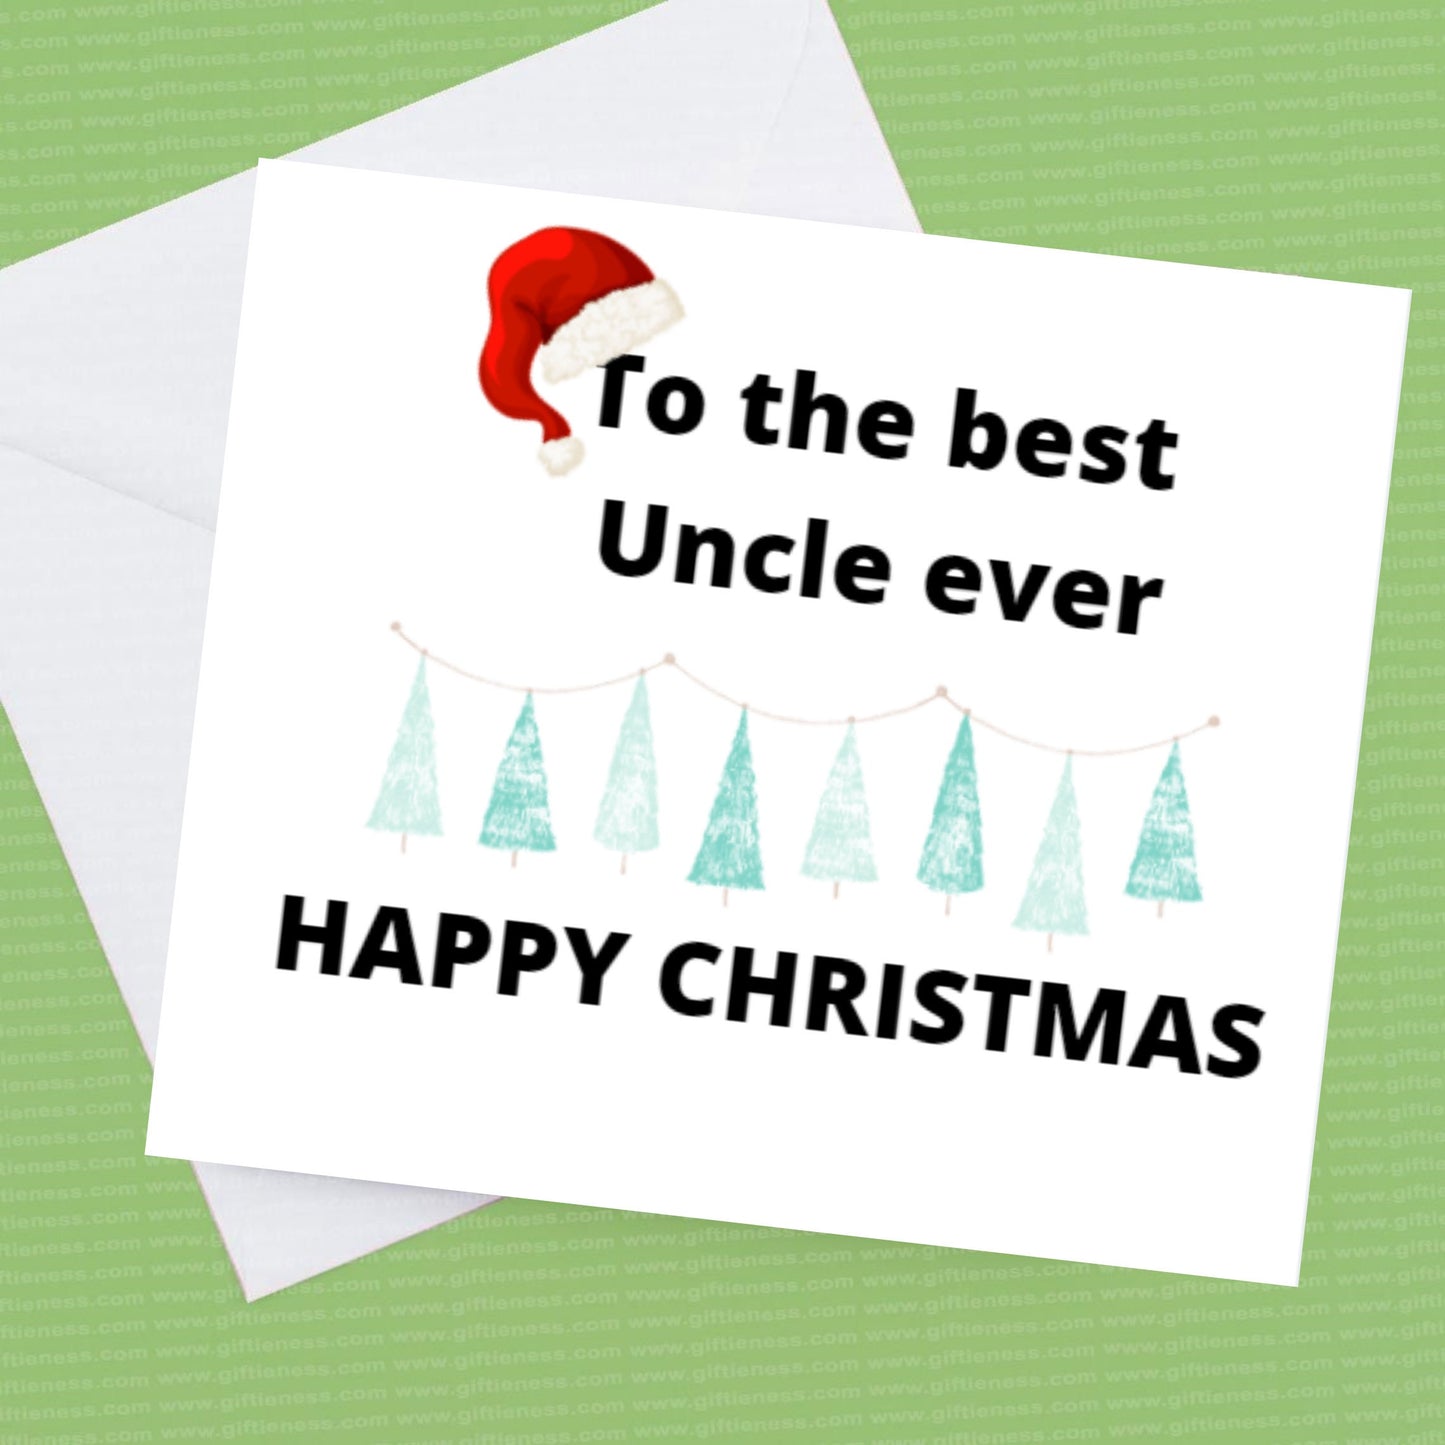 Christmas Card to the Best Sister, Brother, Auntie, Uncle personalise for who you would like